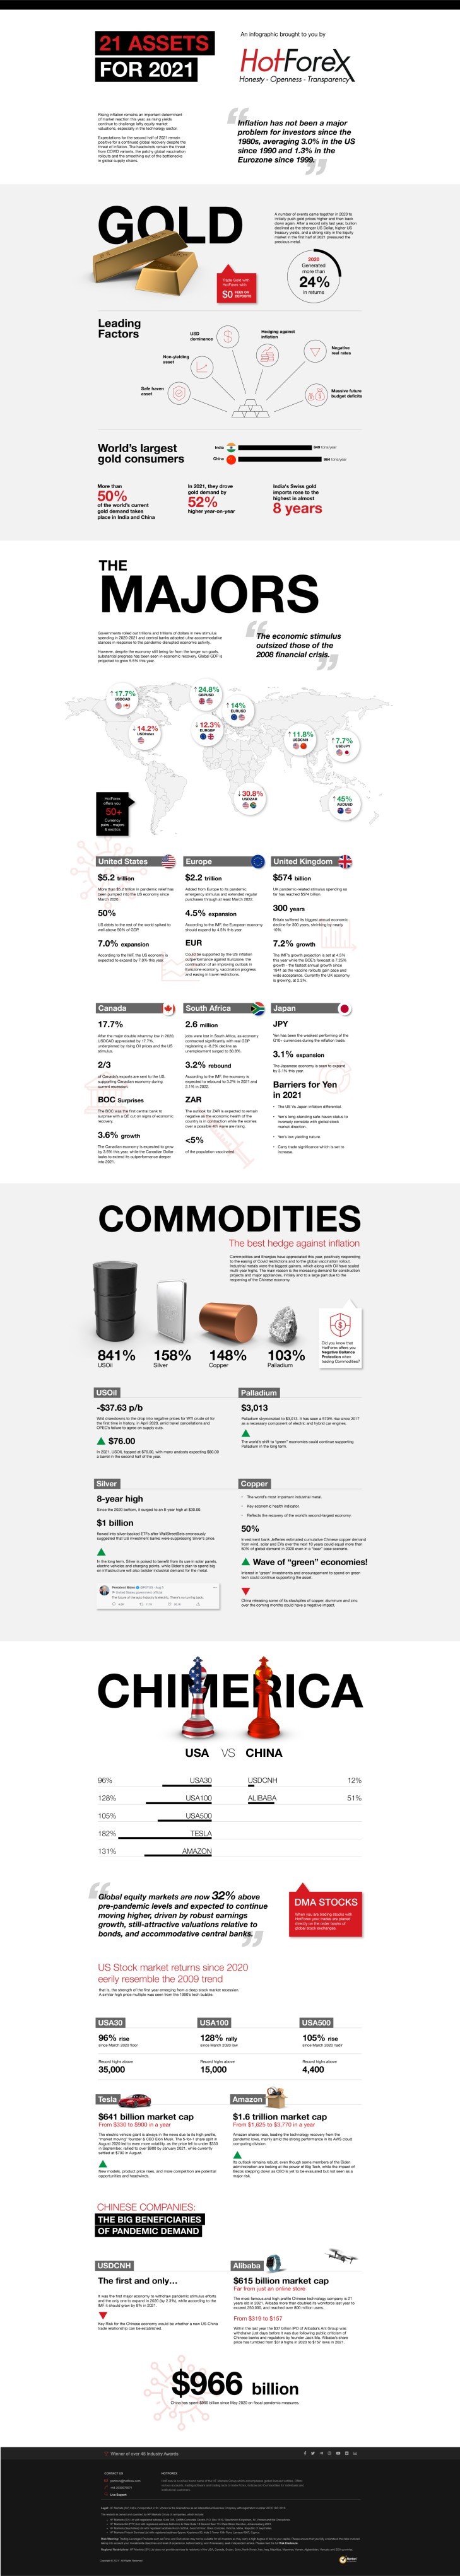 hot forex infographic